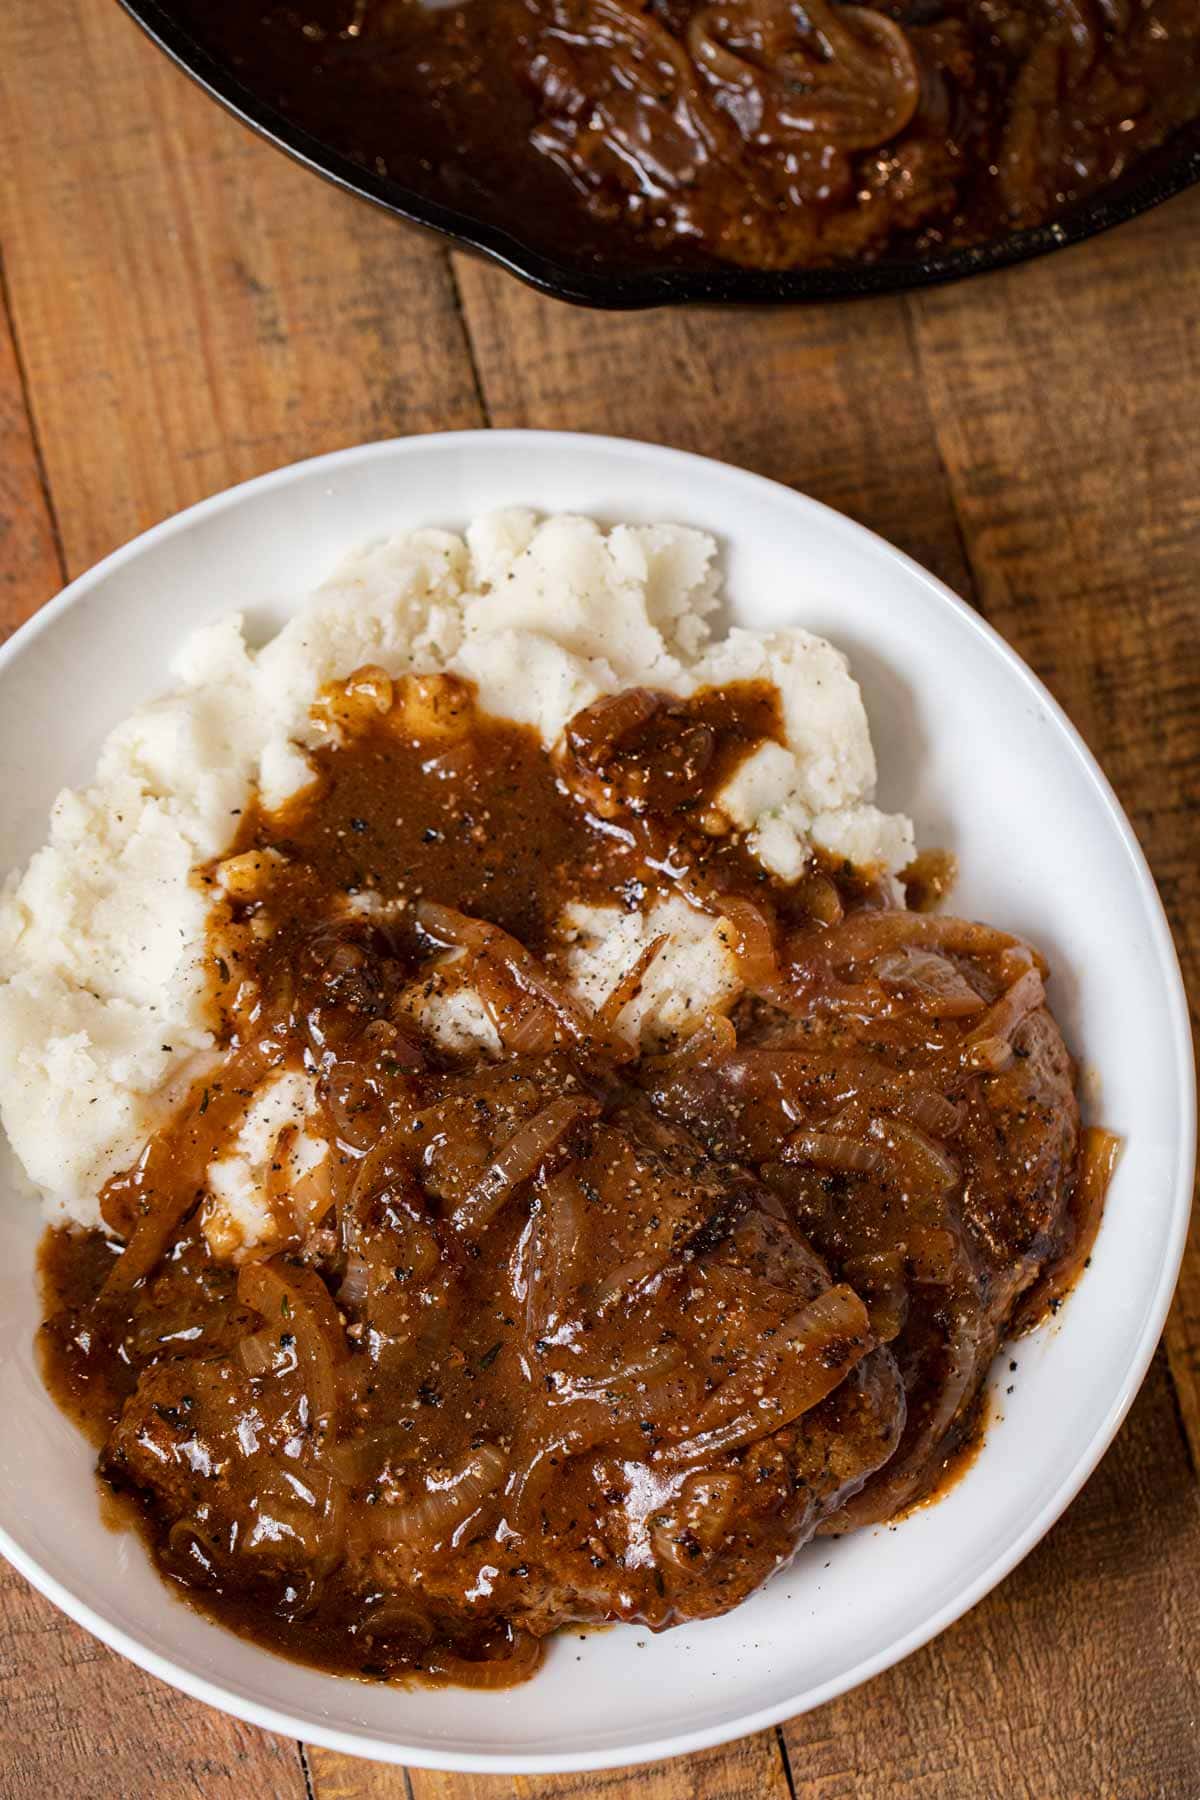 Cube Steak and Gravy on plate with mashed potatoes